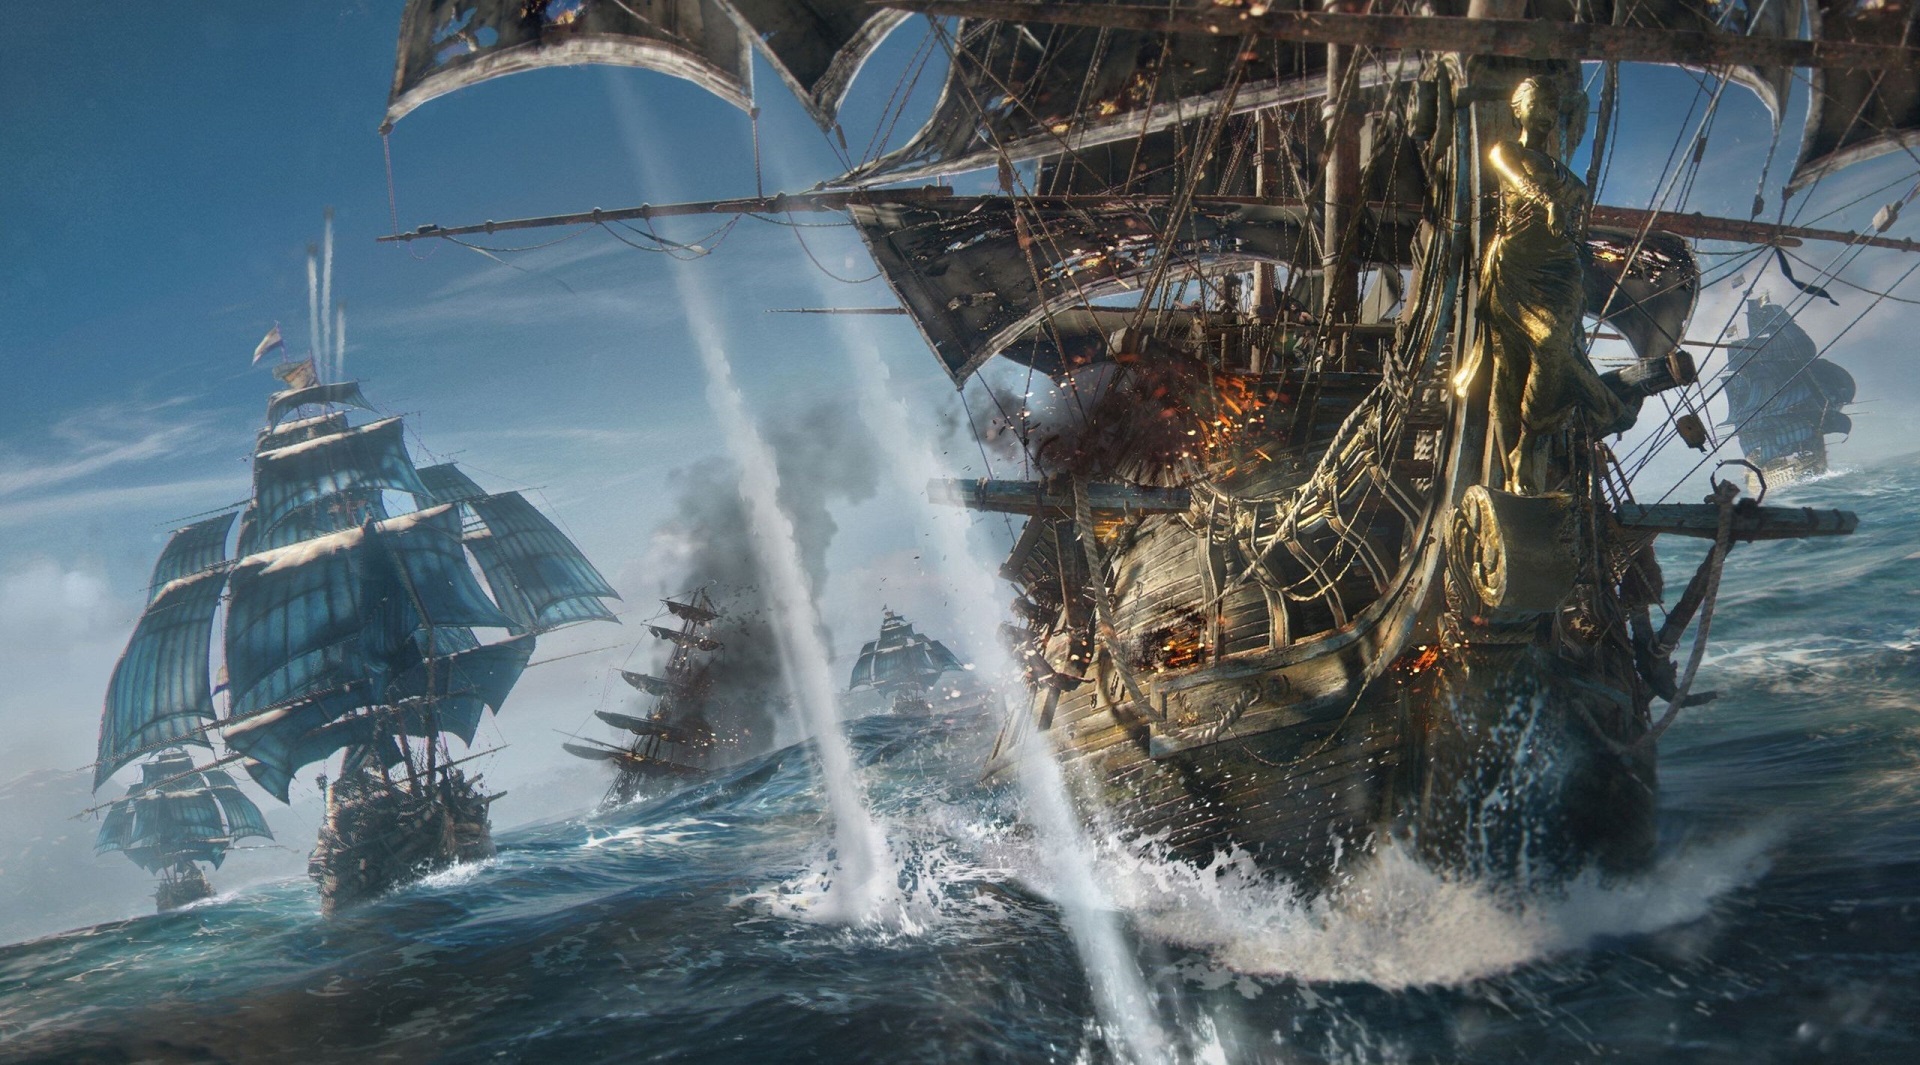  Skull & Bones will release within the next year